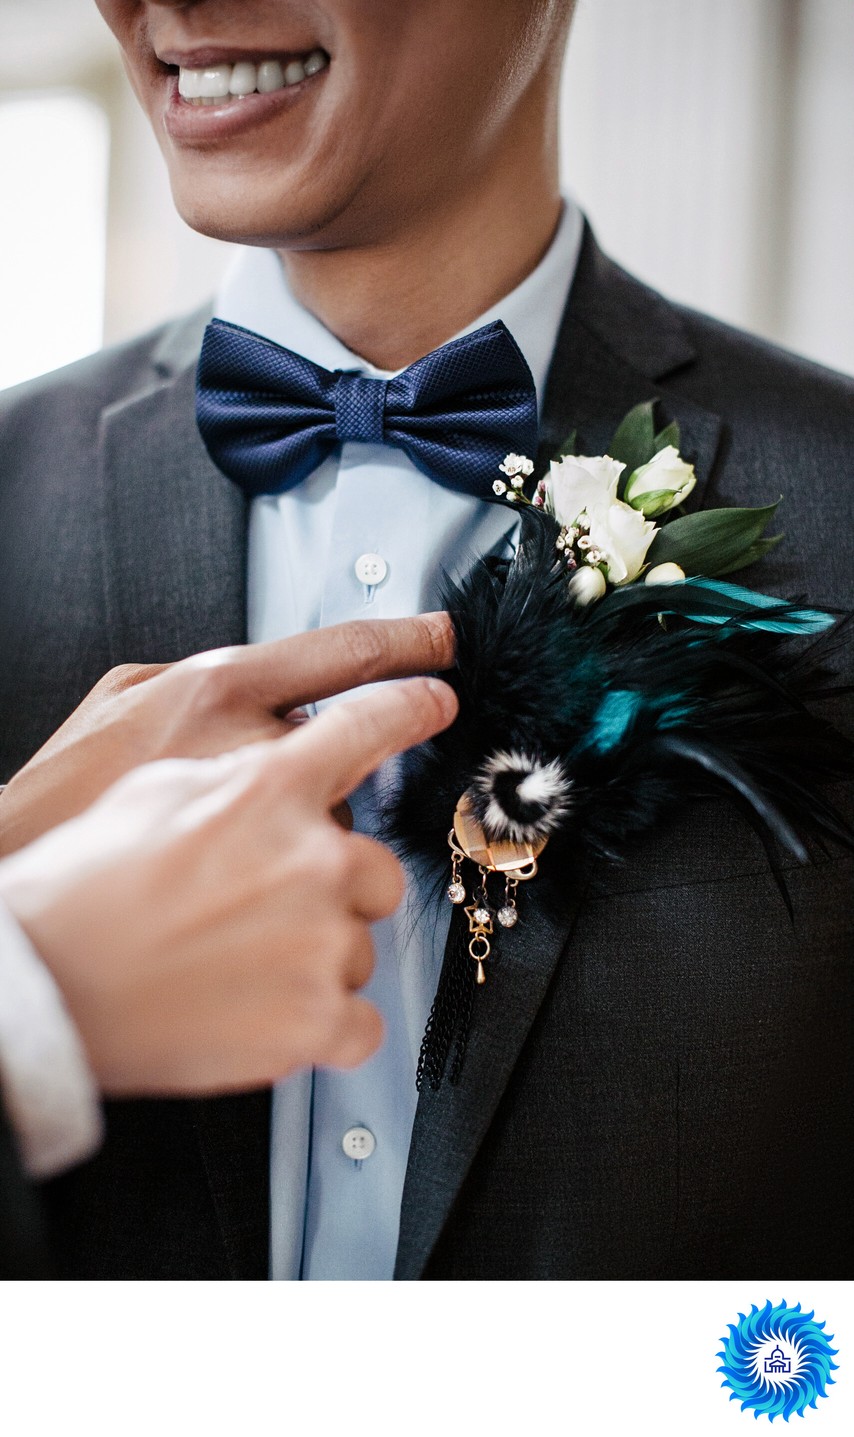 SF City Hall's groom boutonniere